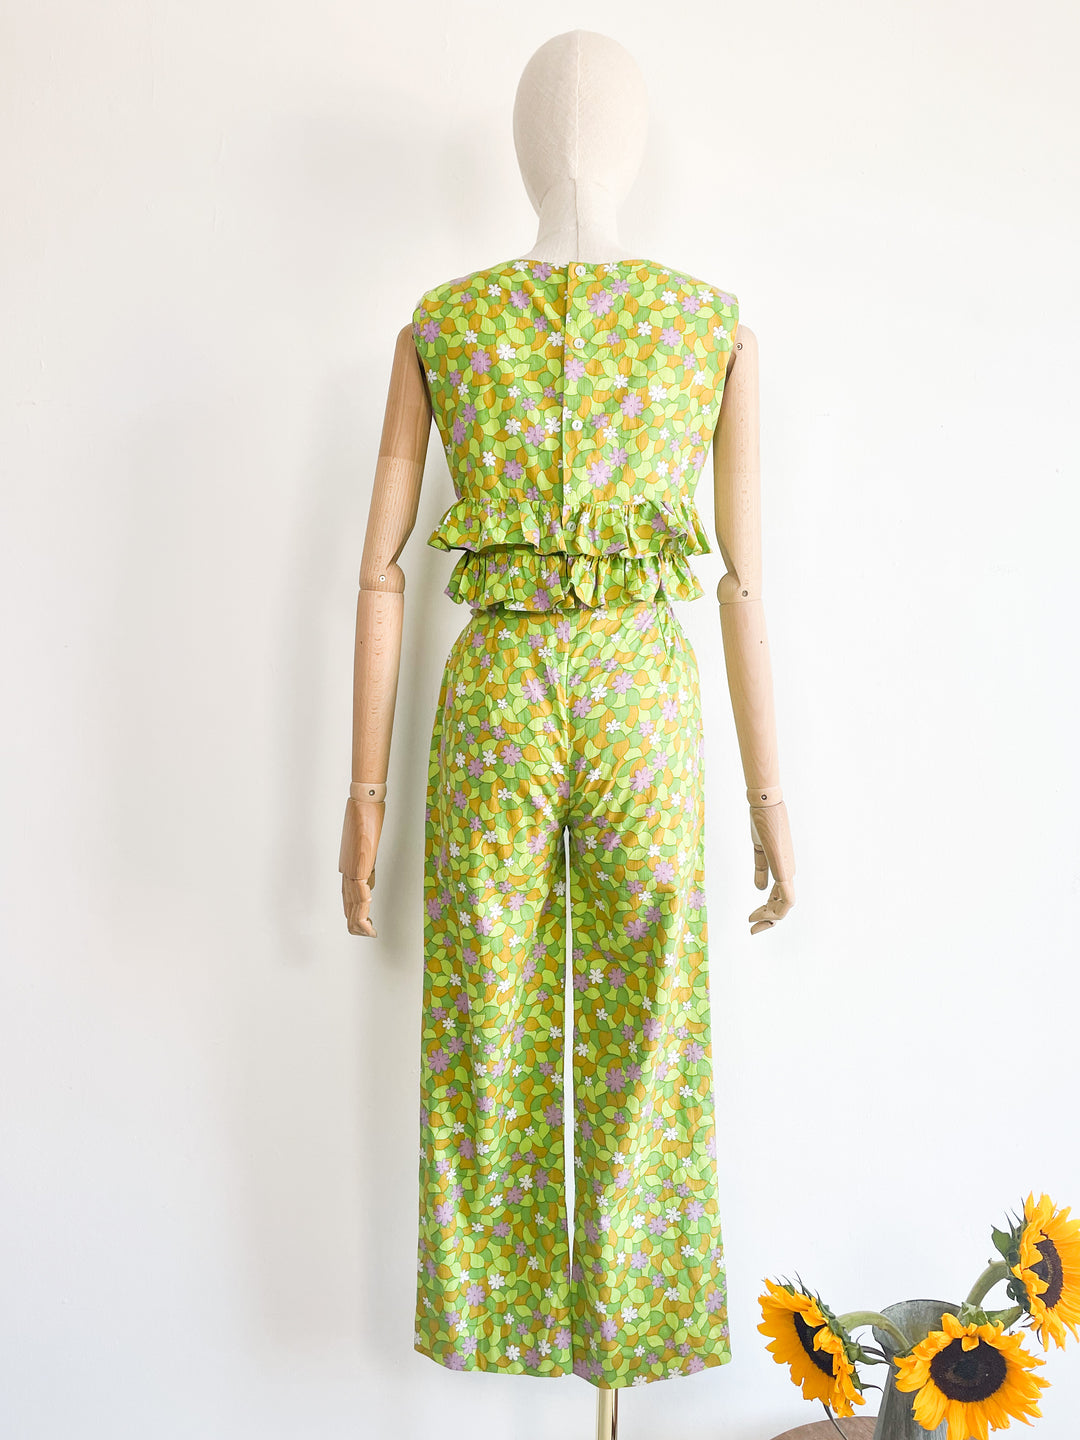 The Groovy Chic 60s Trouser Suit